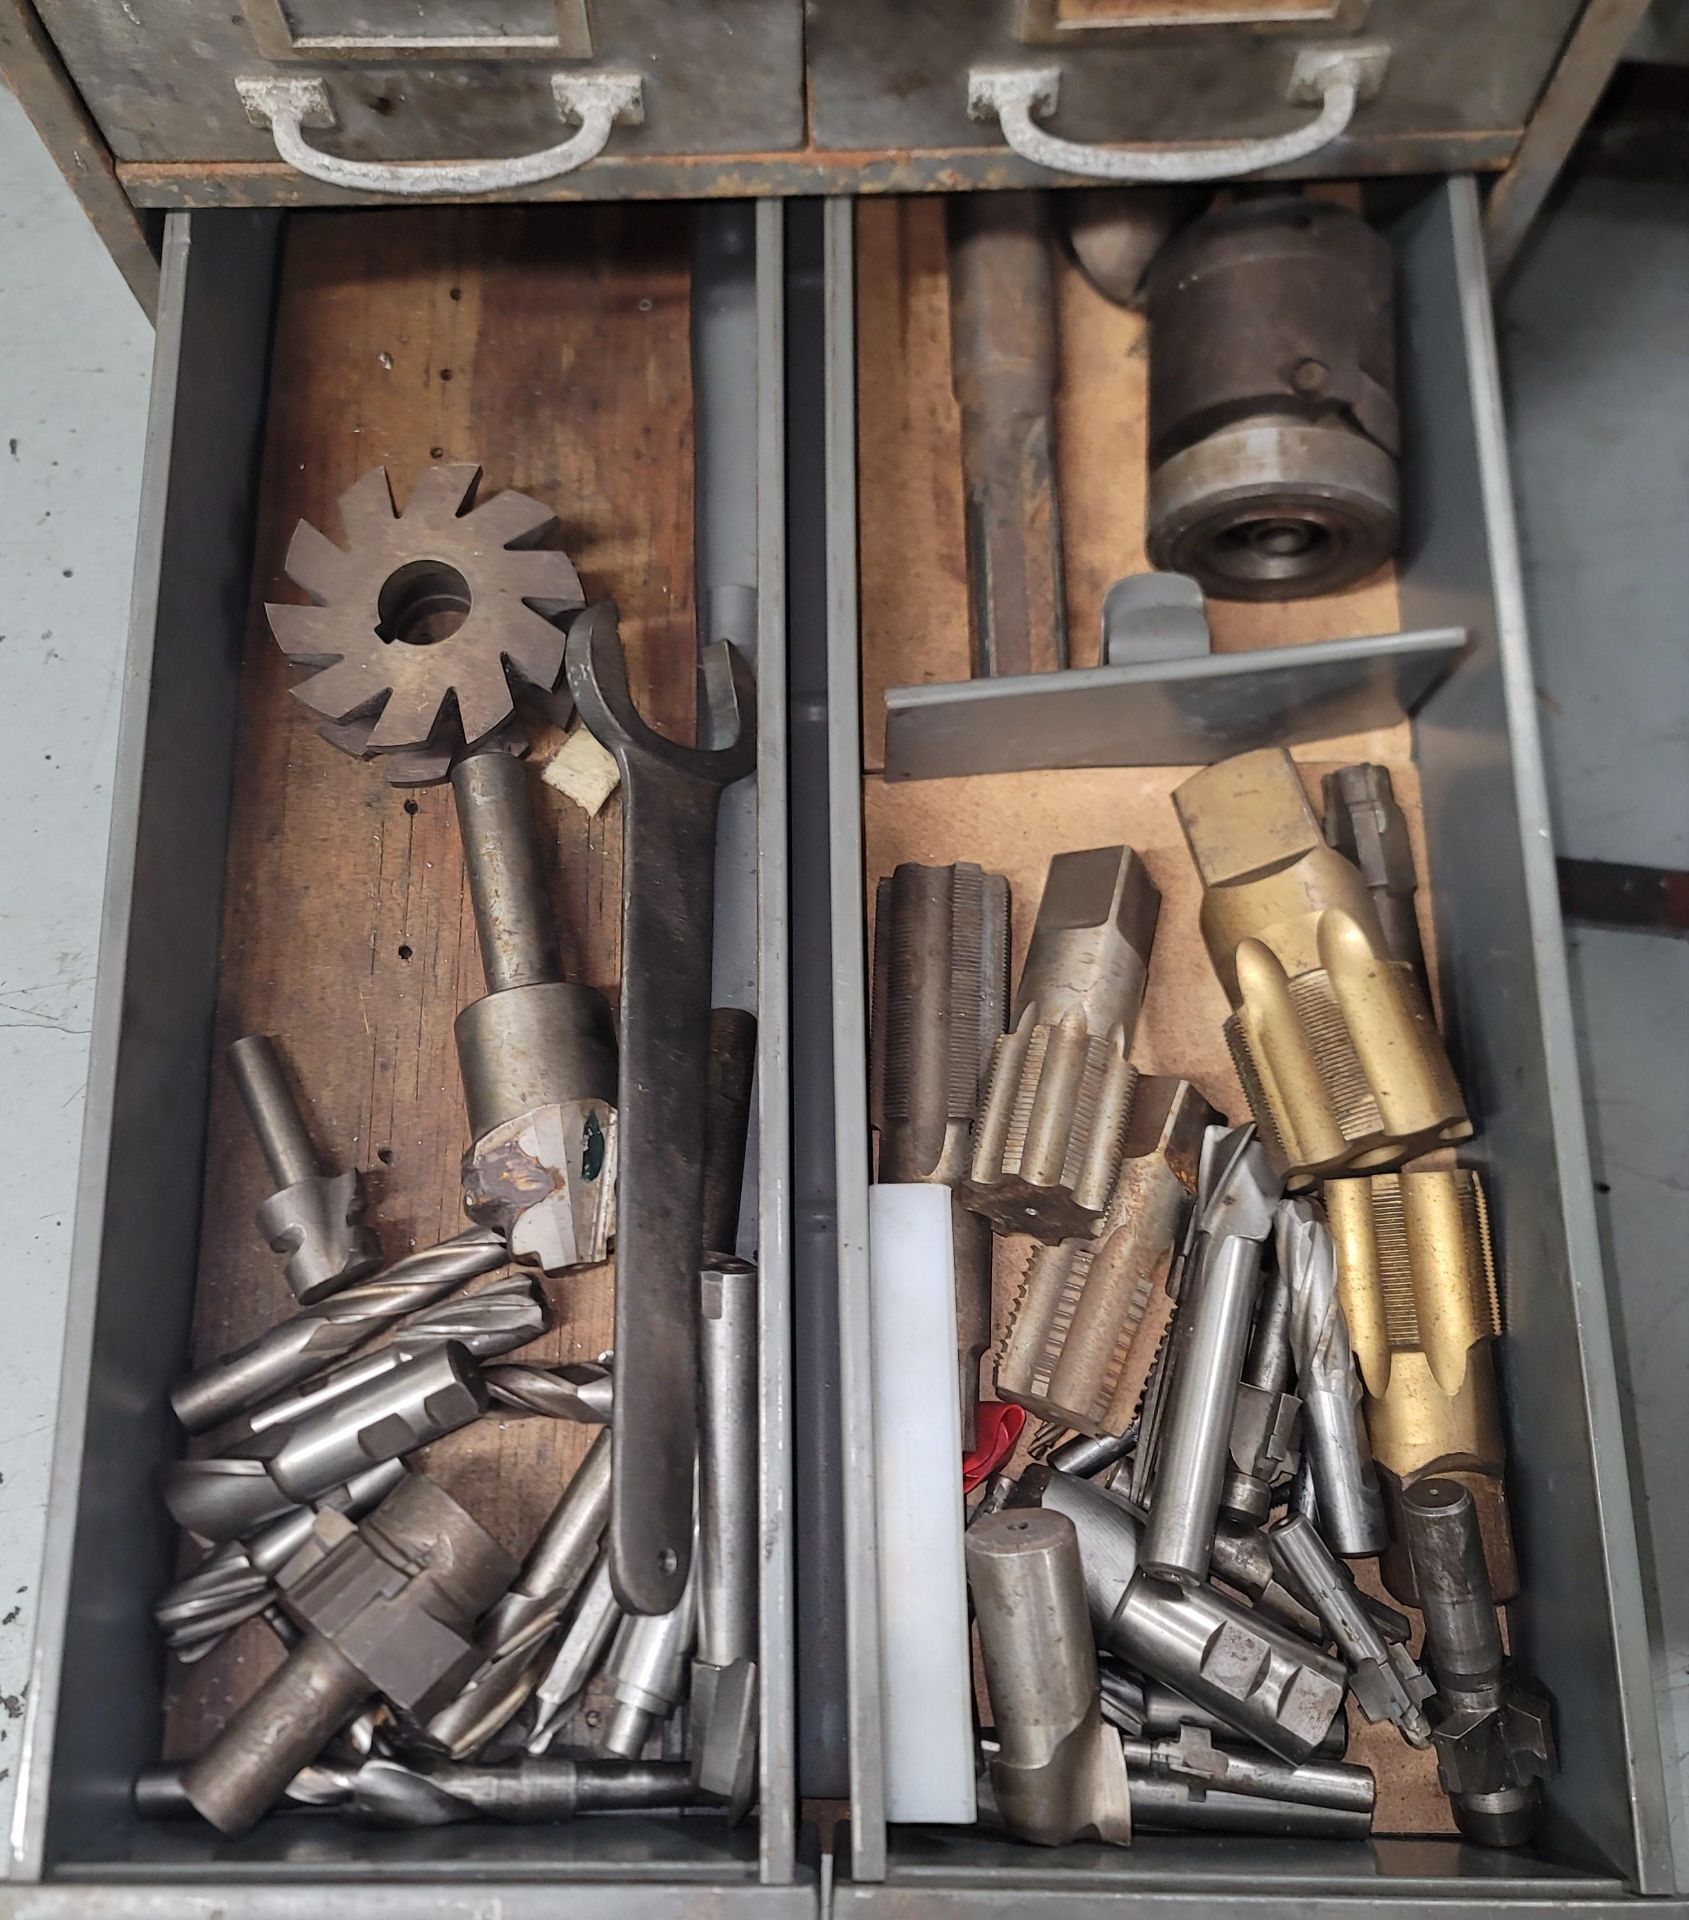 12-DRAWER STEEL CABINET, W/ CONTENTS: FULL OF TOOLING: REAMERS, TAPS, DRILLS, LATHE AND MILL - Image 2 of 7